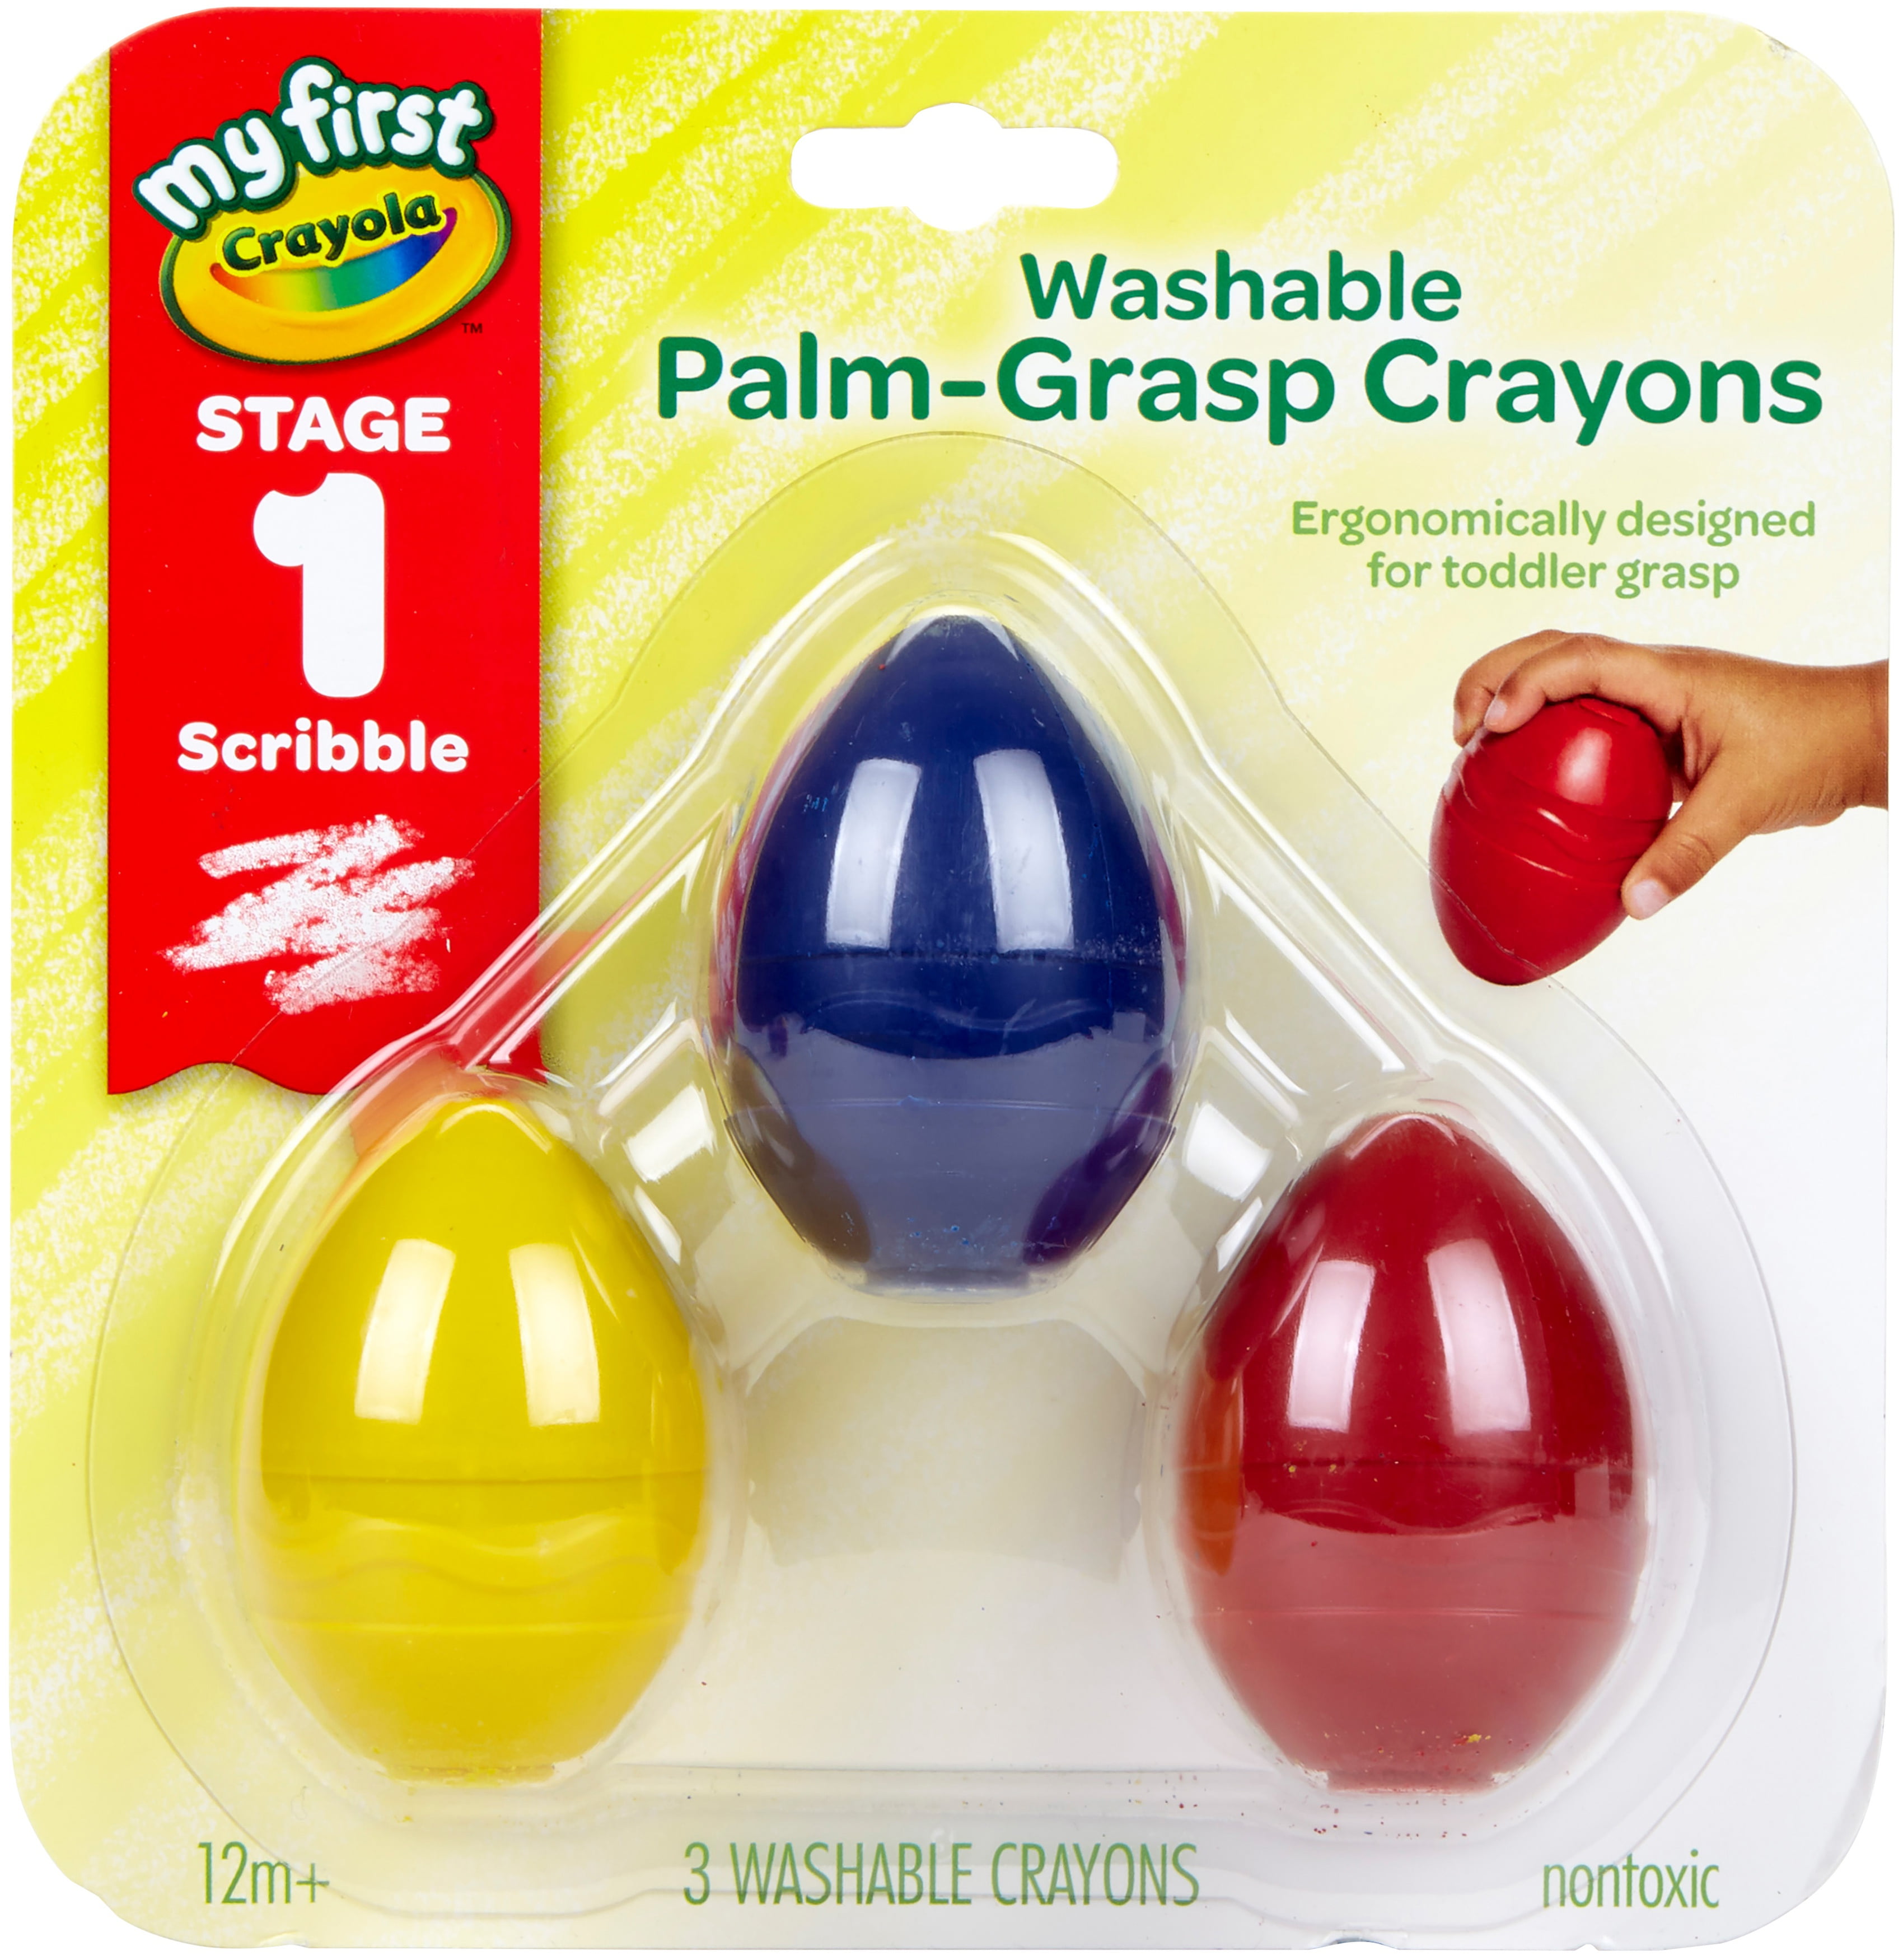 Crayola Silly Putty- The BIGG EGG - 1/4 Pound Red, Child Ages 4+ 